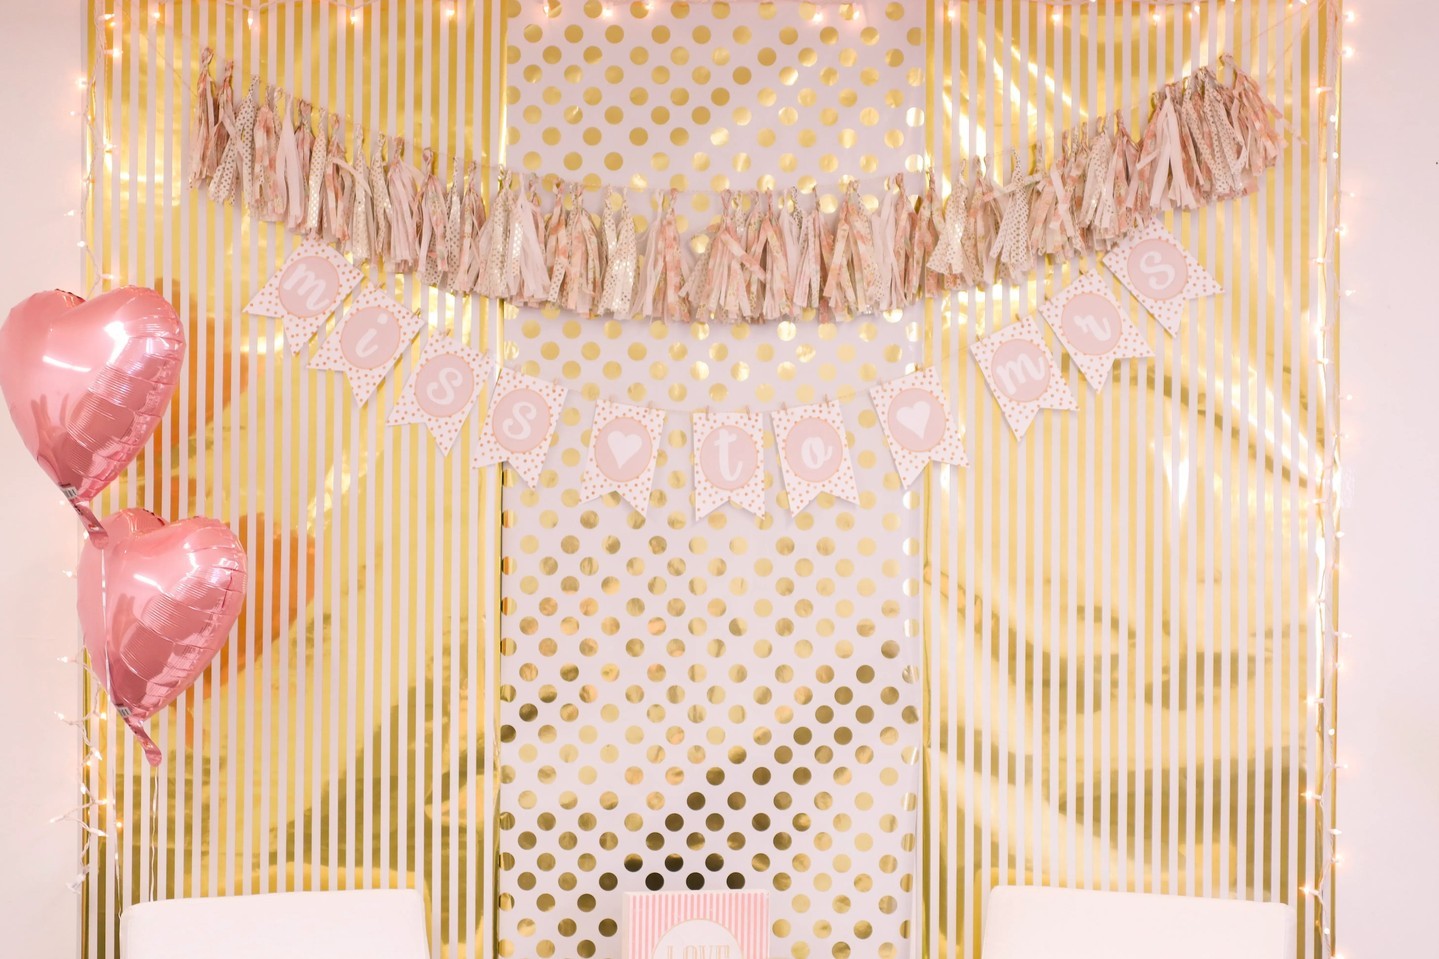 Since we're on the topic of weddings and showers (peek at yesterday's post if you haven't seen it) - here are a few cute ideas if you're planning a shower this spring or summer. Pretty and feminine gold and blush pink, one of my favorite combos! In this post, I share with you what I did for my sister's bridal shower PLUS we have a free printable available for download for you :-) ⁣
Go to SixCleverSisters.com and search "bridal shower" for this post and more wedding-related ideas!⁣
⁣
#sixcleversisters #wedding #bridal #bridalinspo #pink #gold #girly #feminine #partytime #girlsnight #weddinginspo #weddingstyle #weddingplanning #weddingdecor #weddingflowers #weddingday #bridetobe #weddingseason #weddingtime #instabride #flower #weddingplanner #weddingdetails #floral #bride #weddingweekend #ido